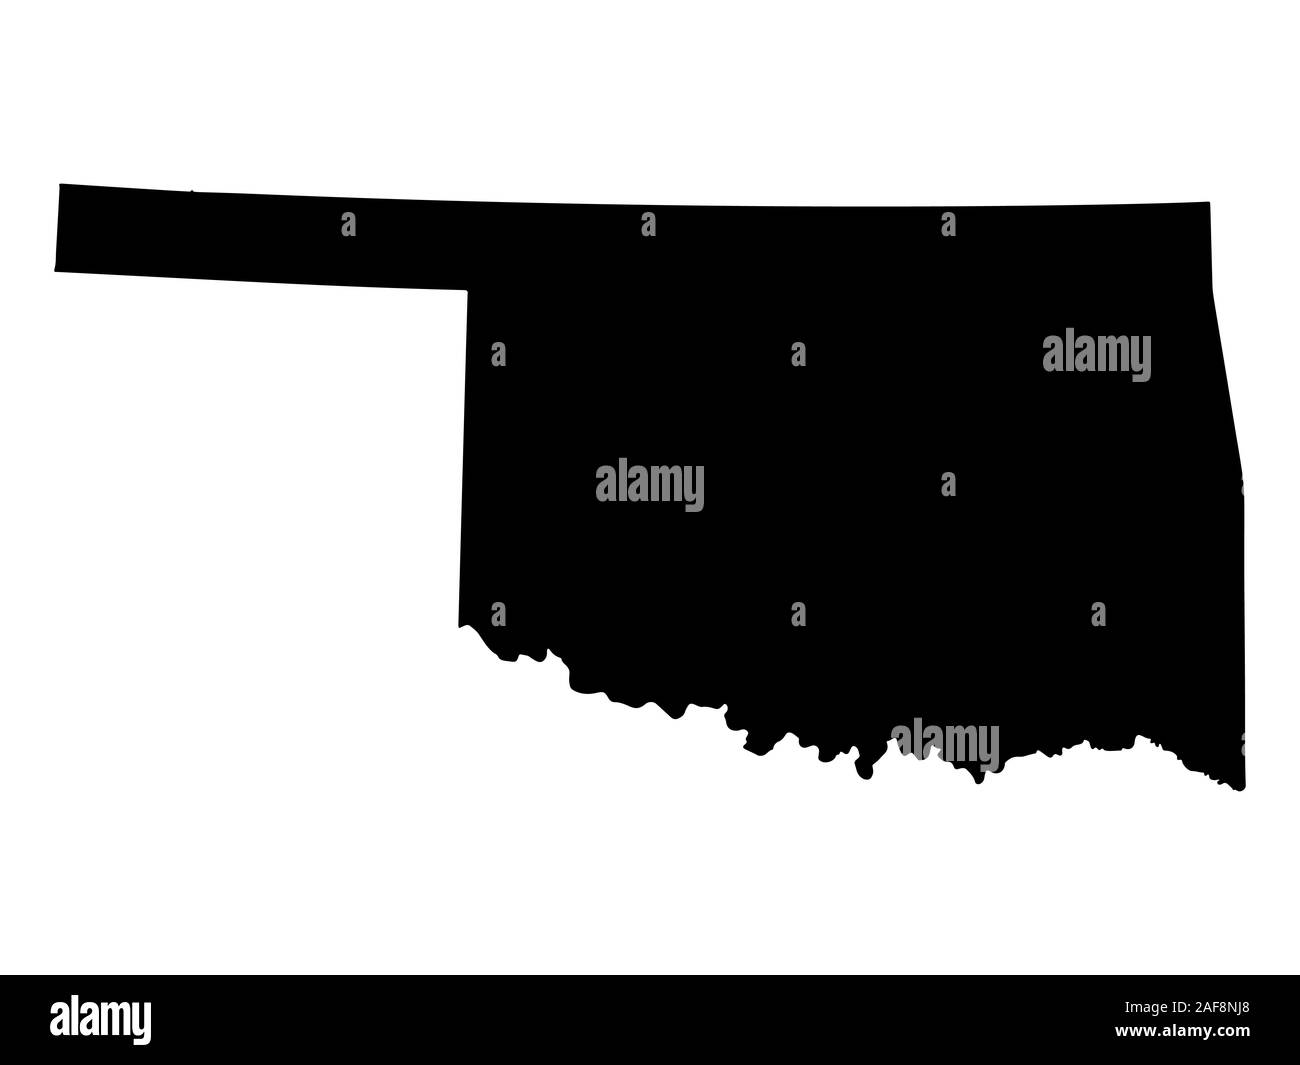 U.S. state of Oklahoma Map Silhouette Vector illustration Eps 10 Stock Vector